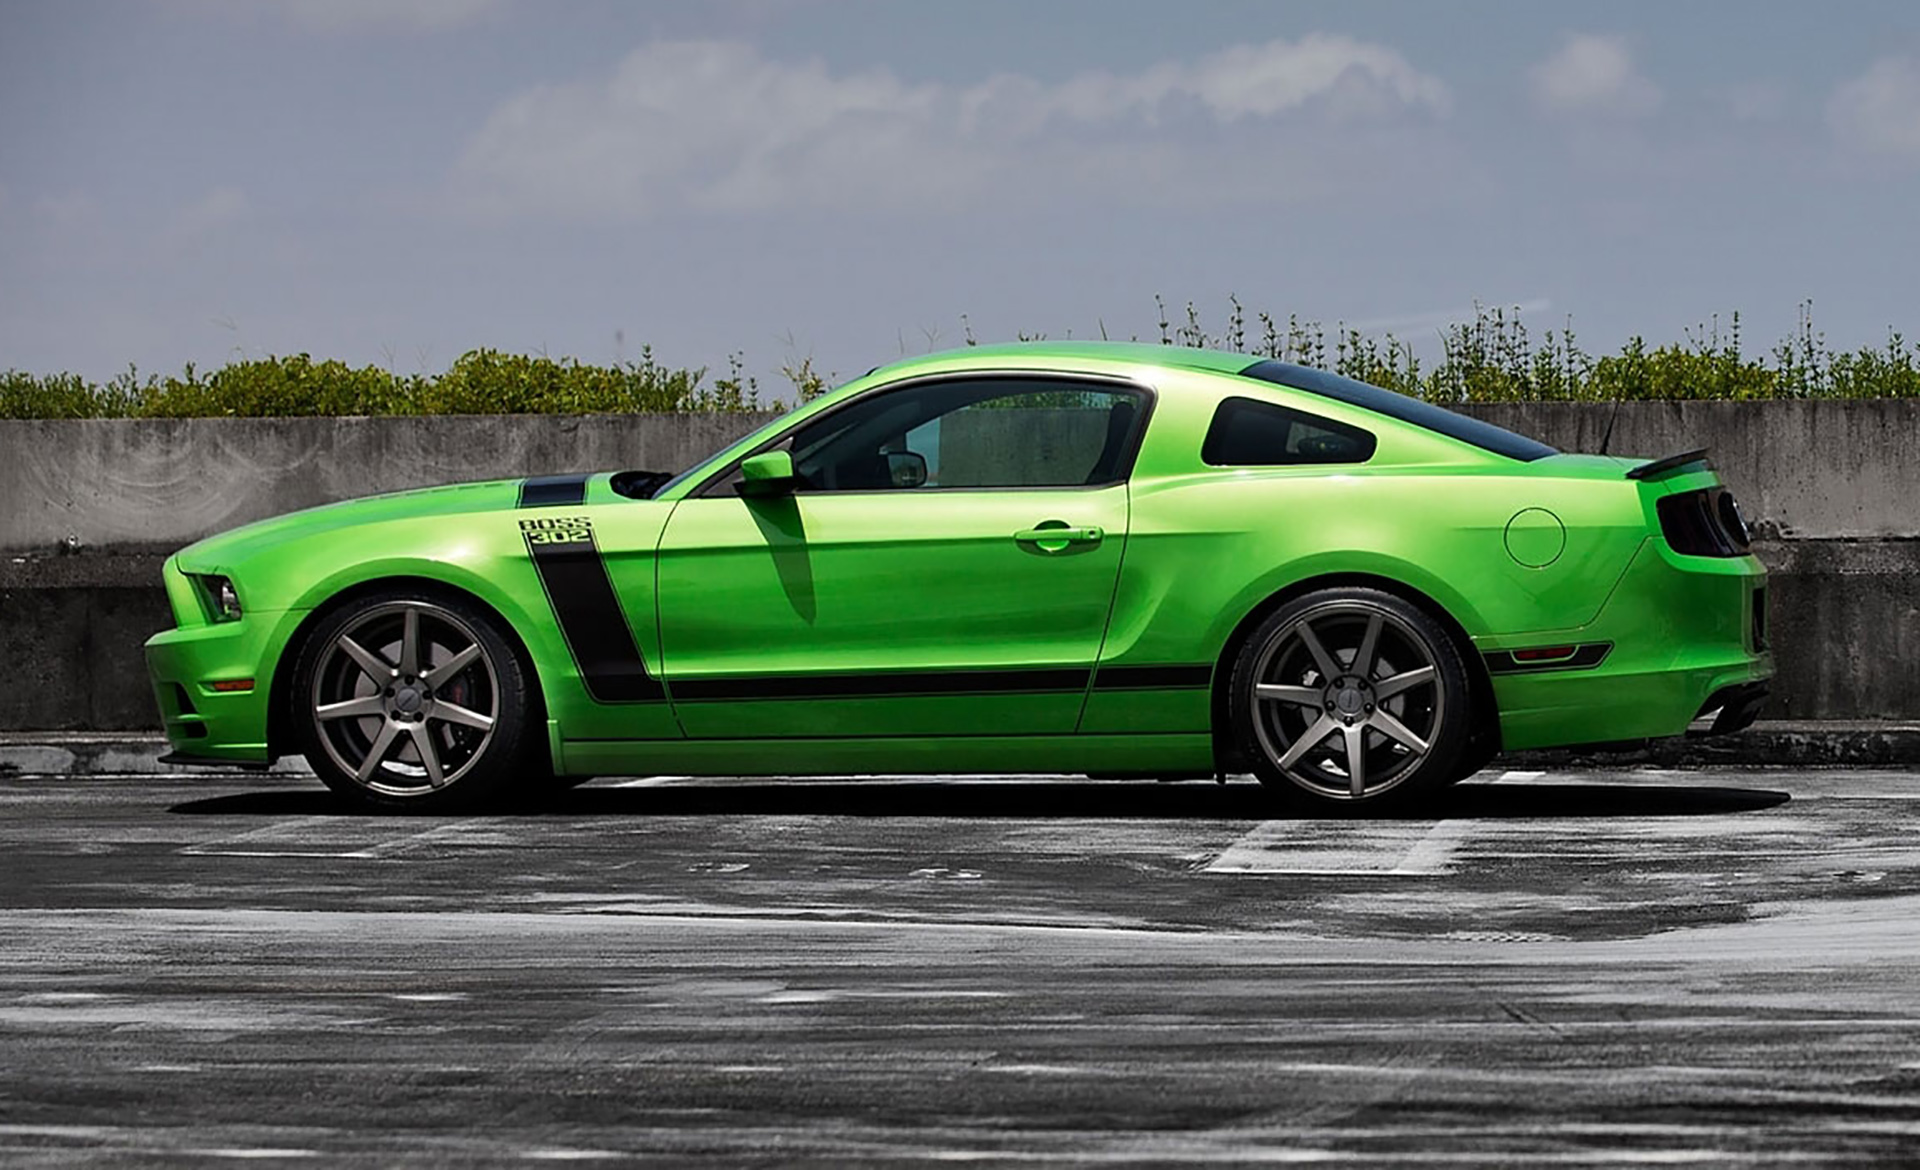 Green Ford Mustang Boss 302 Car Picture Hd Wallpaper - Spagheto Wheels